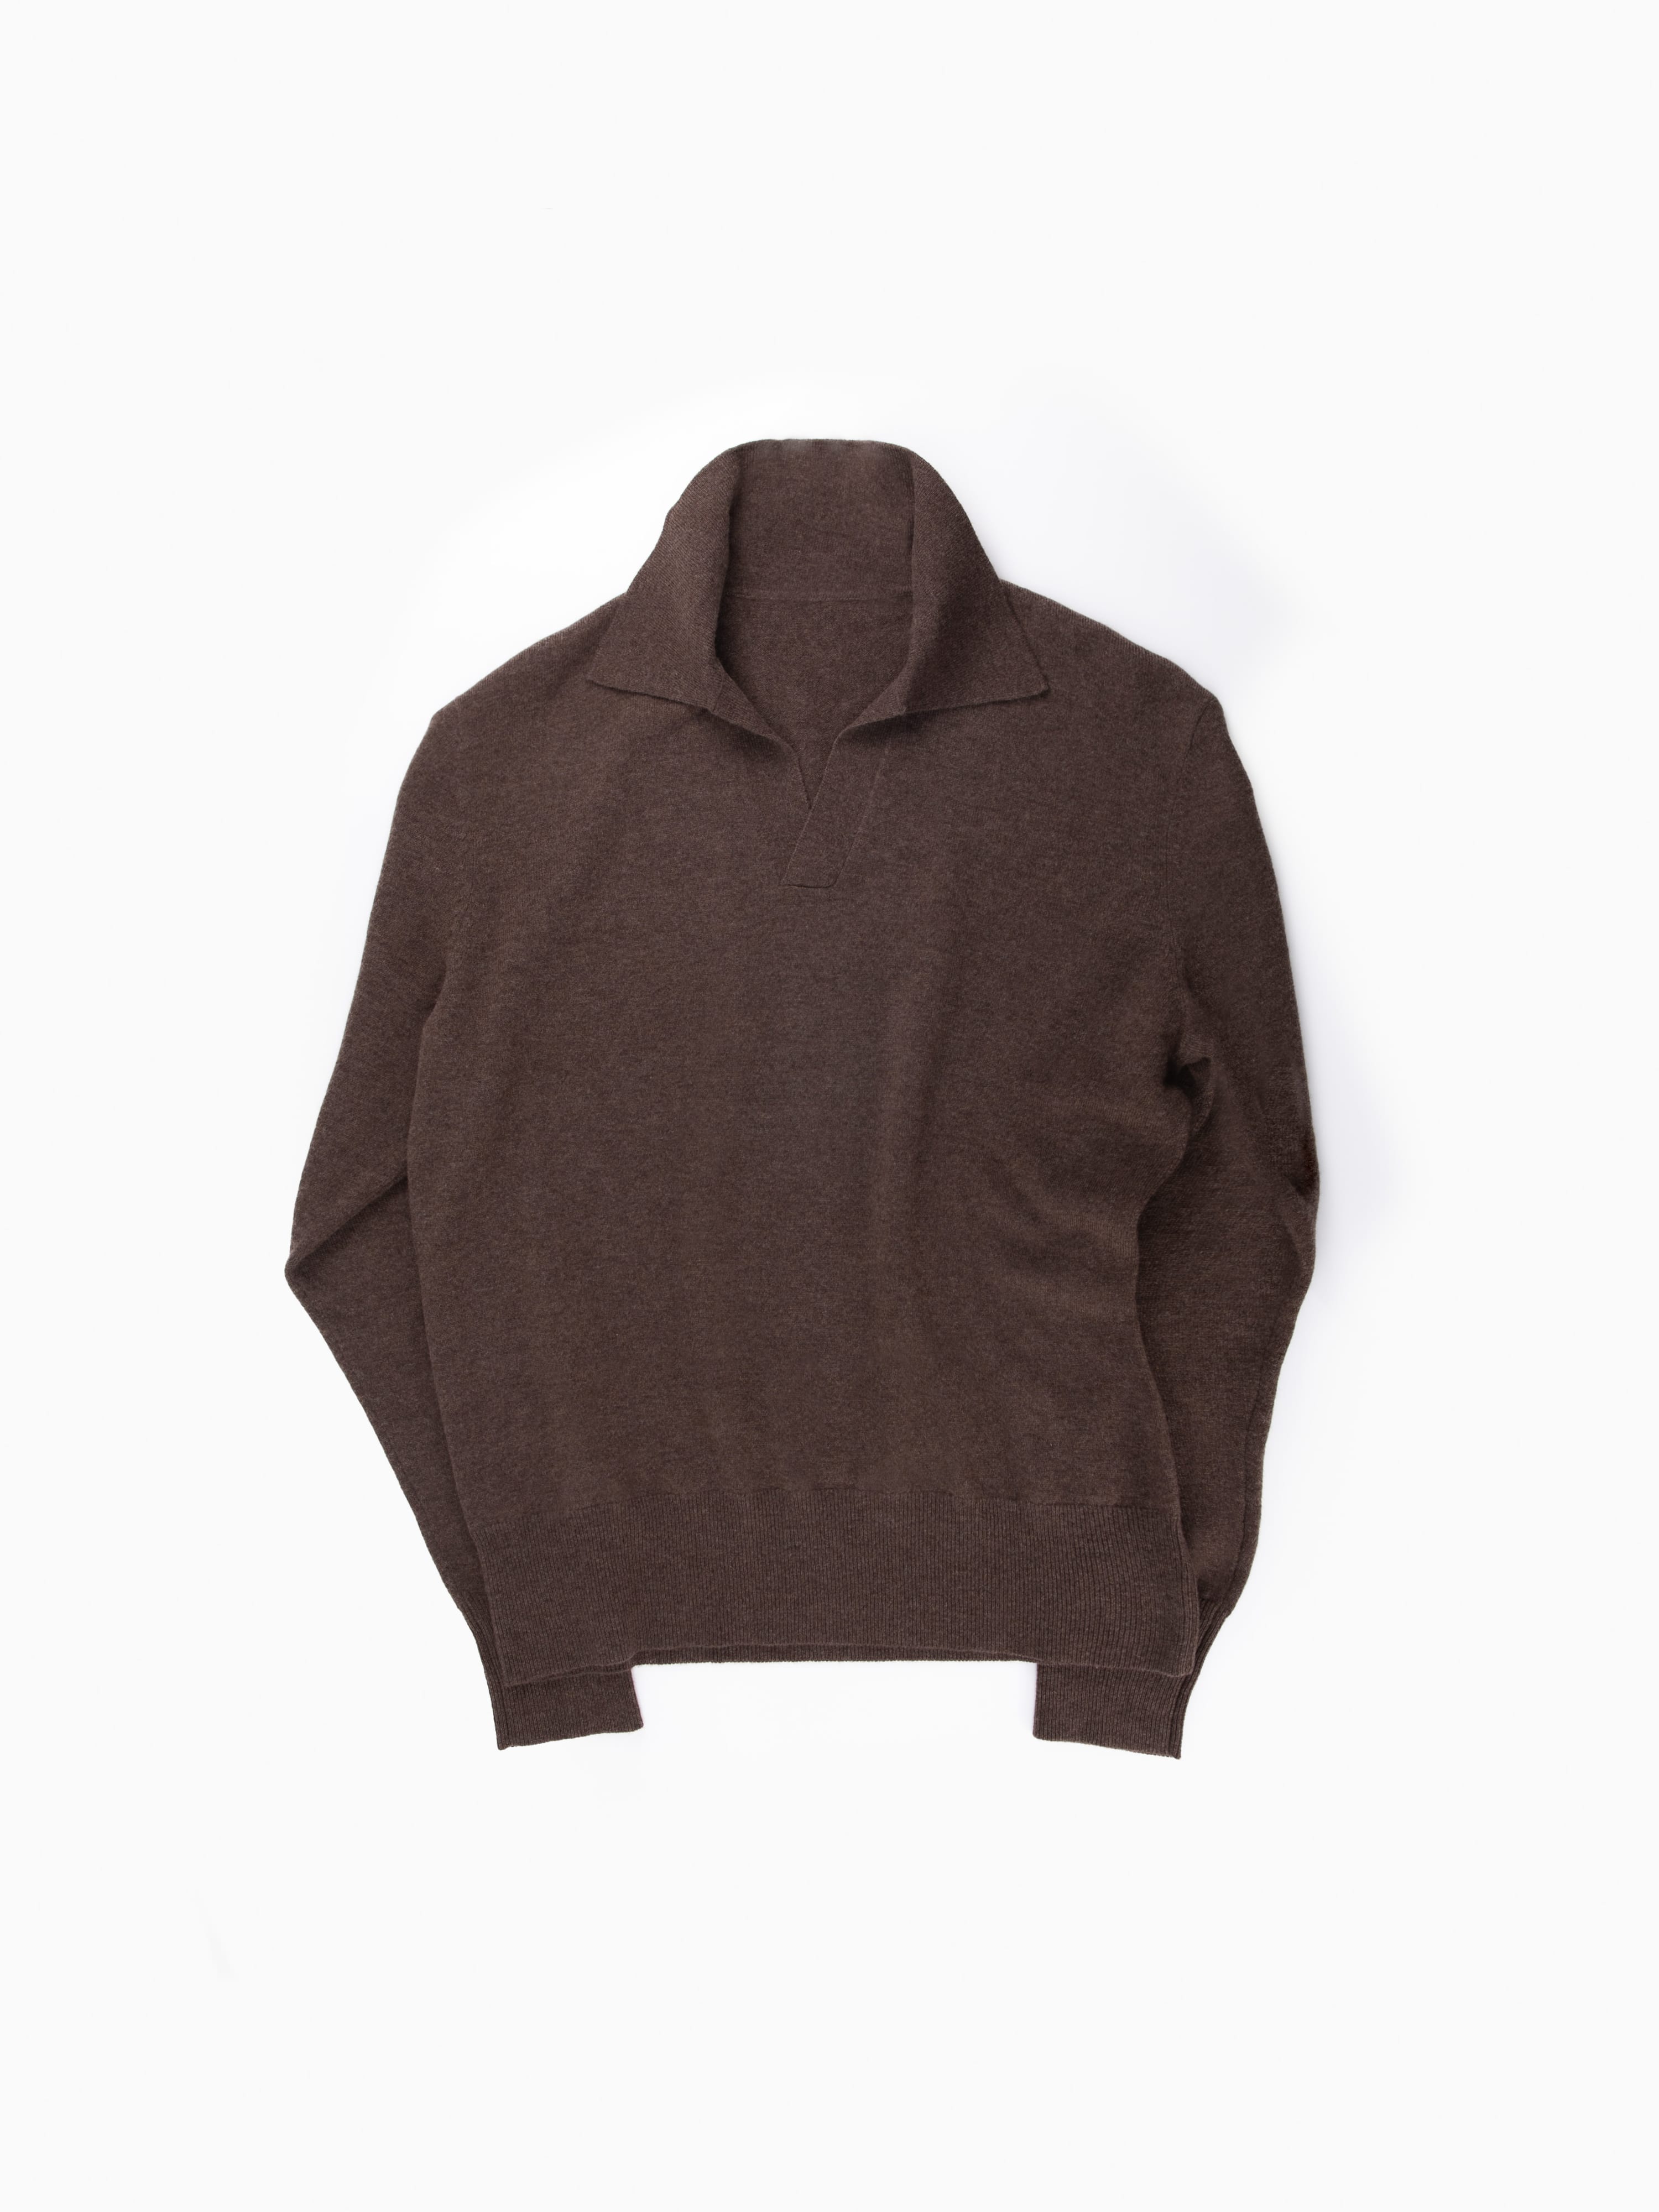 Brown Merino Wool Cashmere Polo Long Sleeve - Grand Le Mar